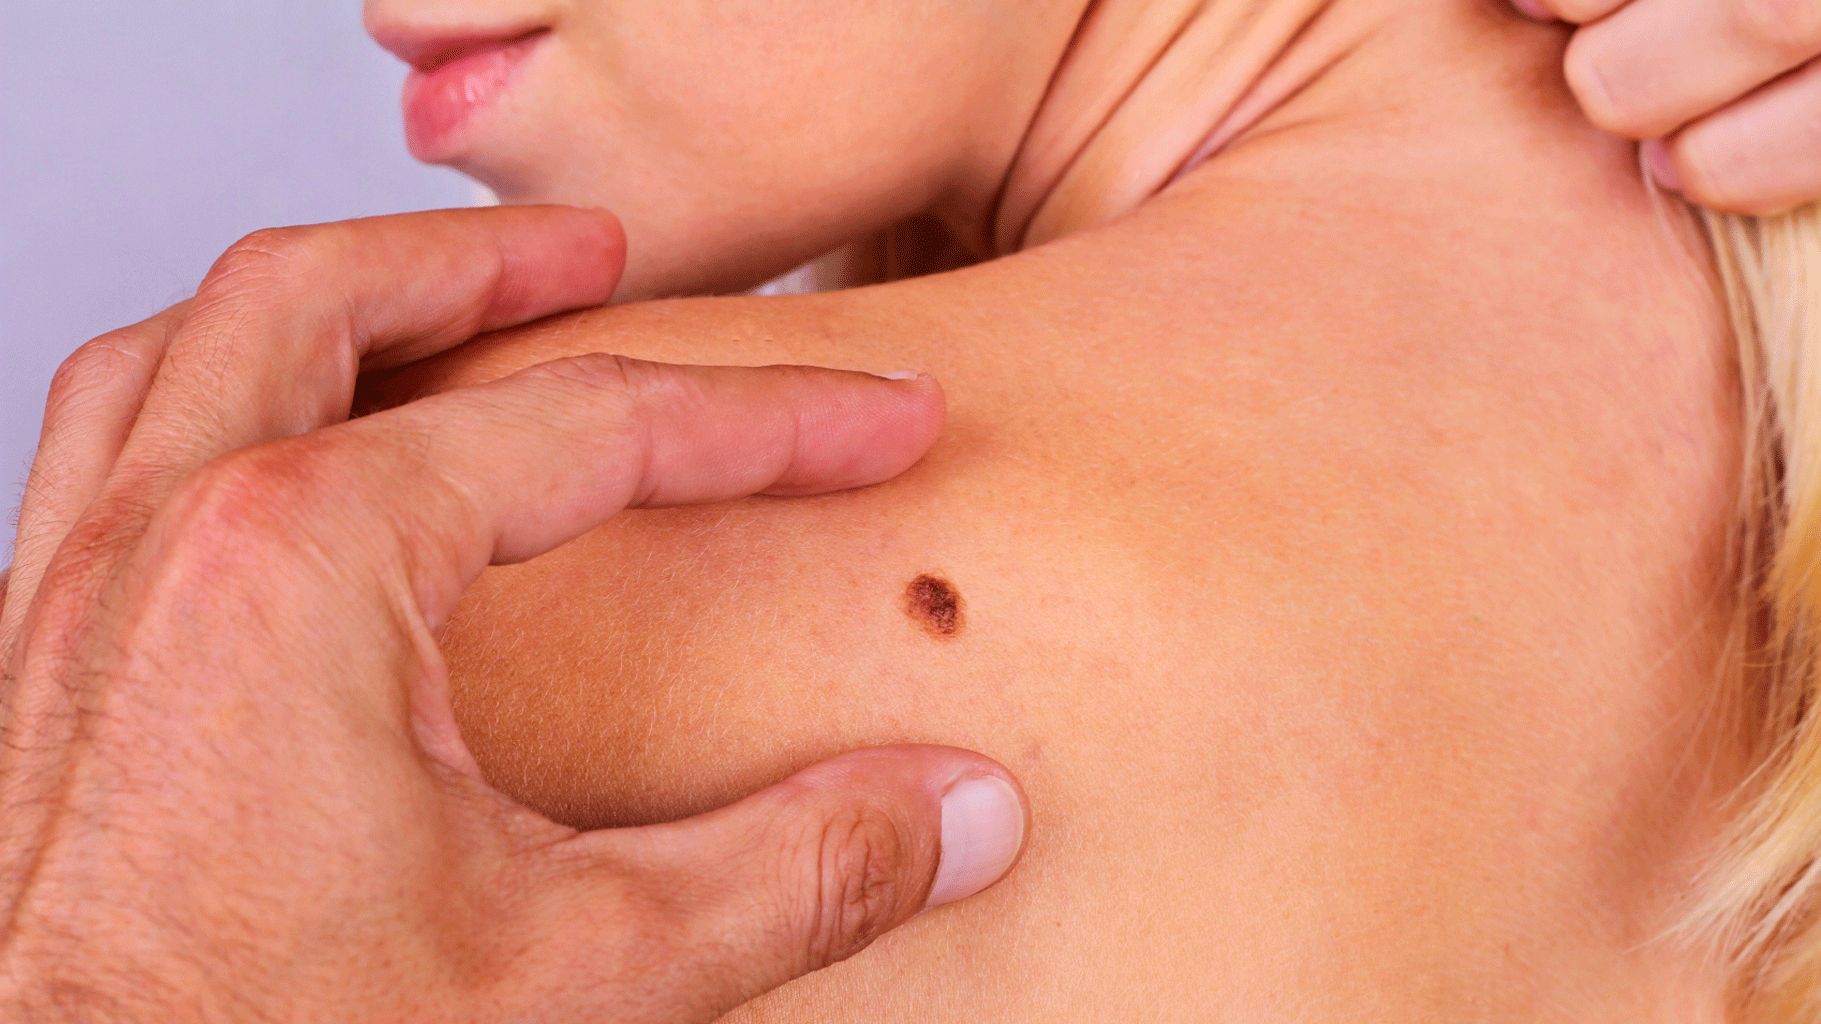 Of all the spots on our bodies, from acne to scars, birthmarks get the least attention. Are these always harmless? 